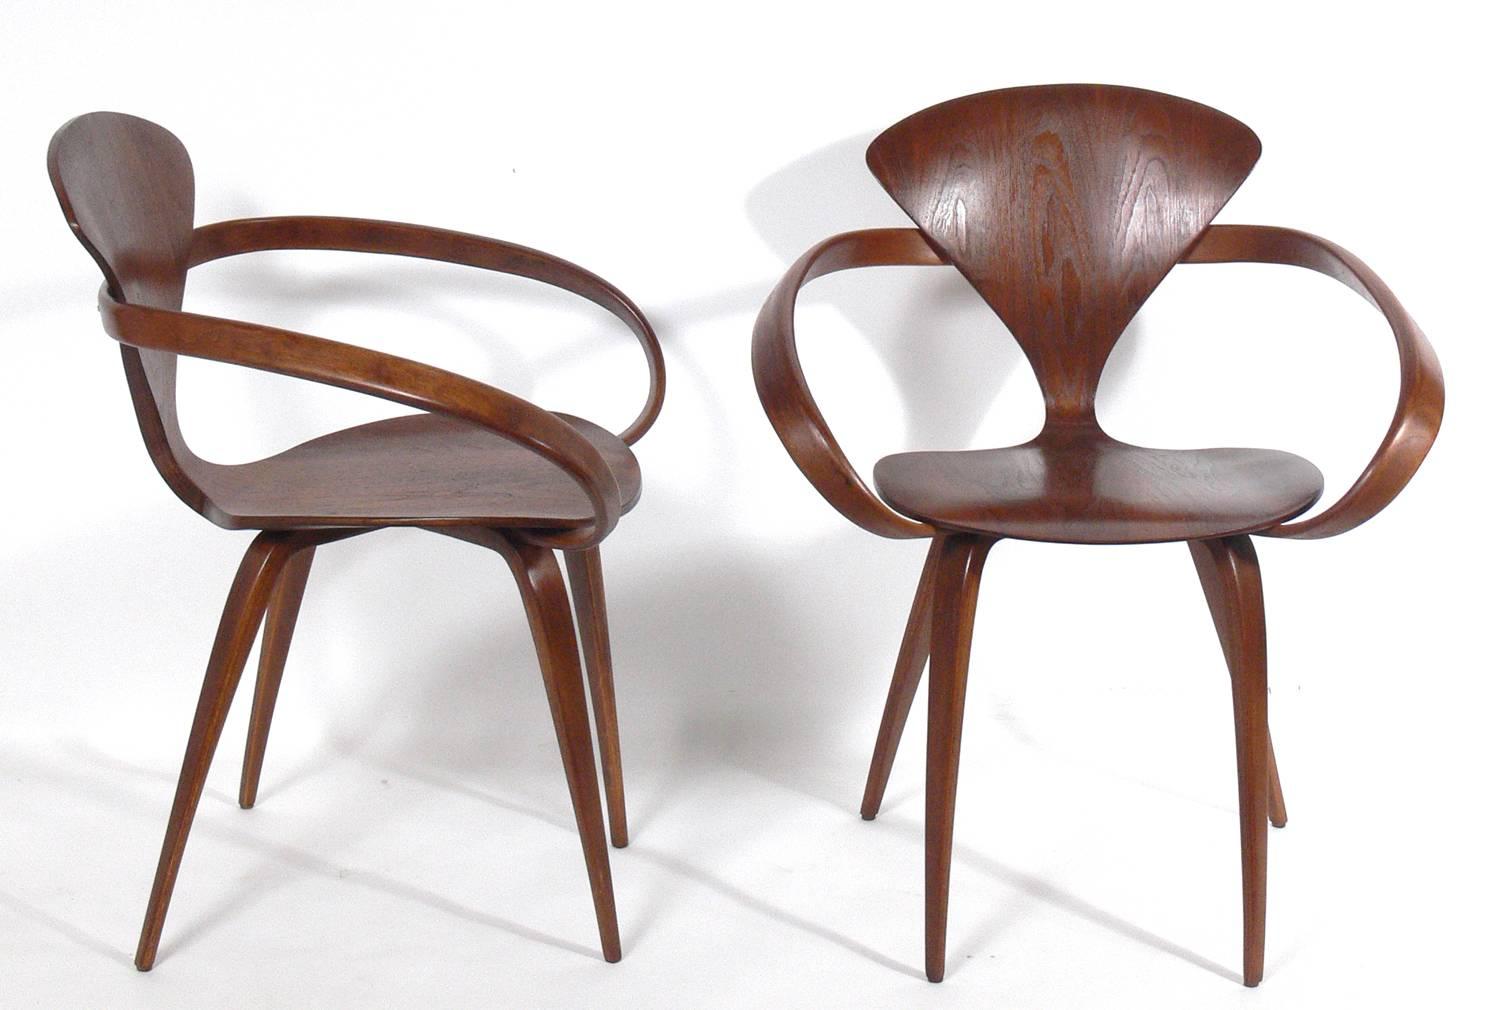 Set of 12 sculptural dining chairs, designed by Norman Cherner for Plycraft, circa 1950s. They have all been refinished and look great. The price noted below is for the set of 12 dining chairs, two armchairs and ten side chairs.